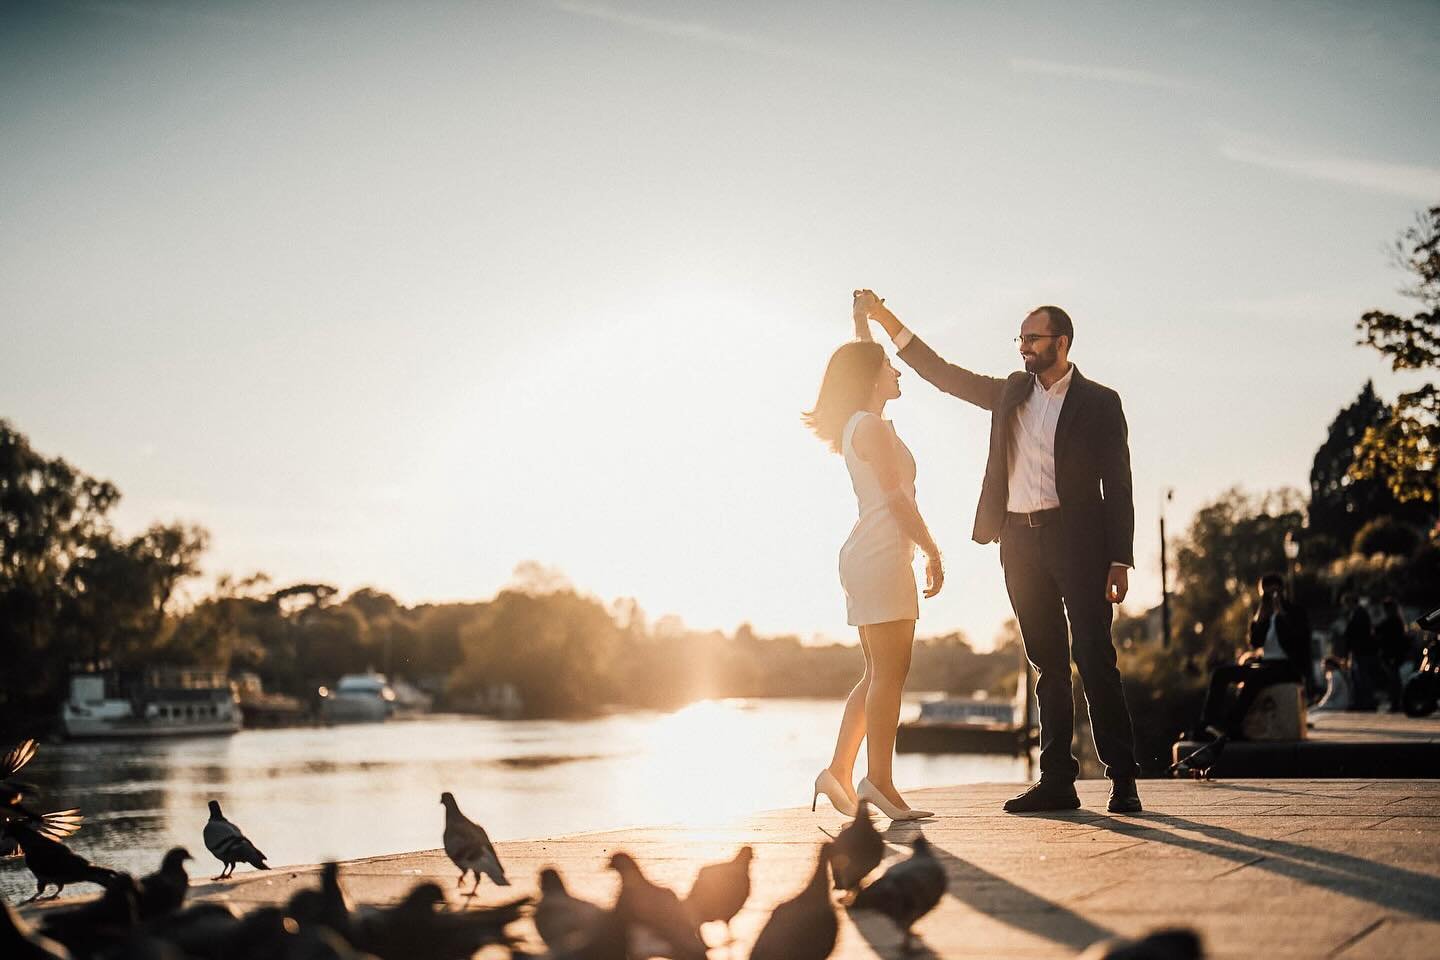 After a few weeks off posting here I&rsquo;ve got some catching up to do! Starting with Duru + Deniz&rsquo;s lovely couple shoot along the Thames in Richmond.
.
.
.
.
.
#richmond #richmondlondon #londonrichmond #londoncouple #londoncoupleshoot #londo